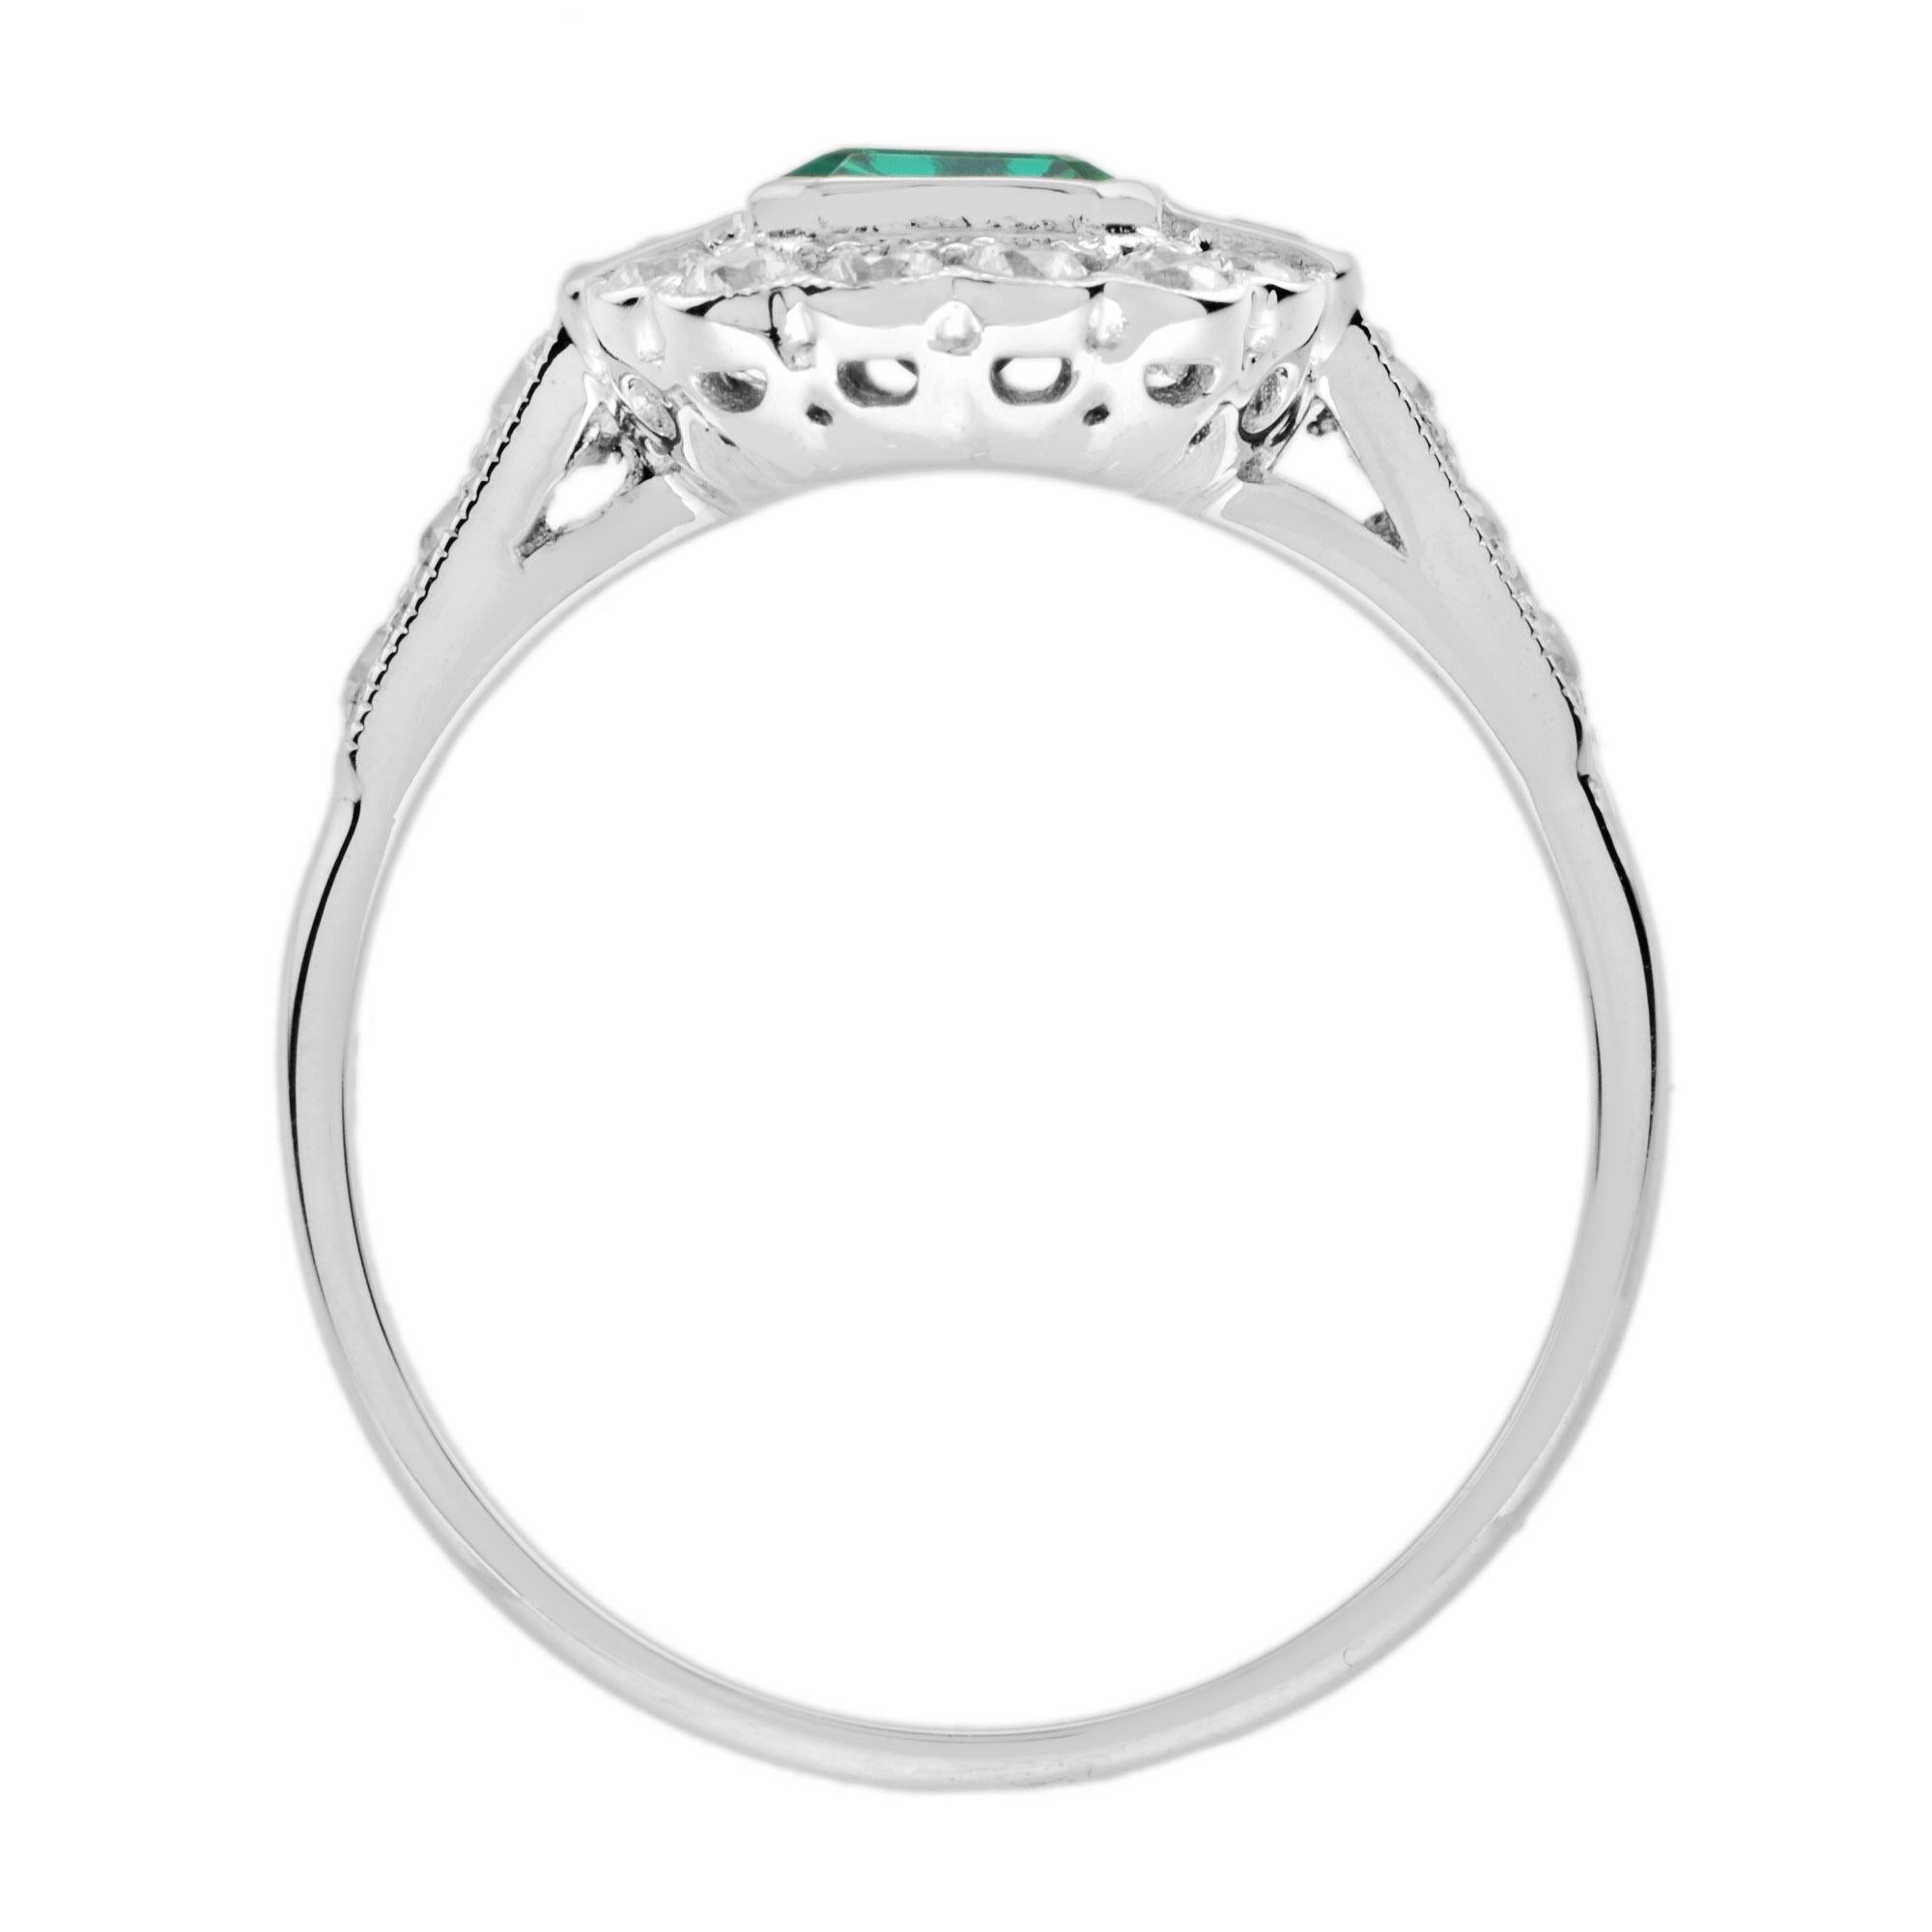 Women's 0.60 Ct. Emerald Diamond Halo Antique Style Engagement Ring in 18K White Gold For Sale